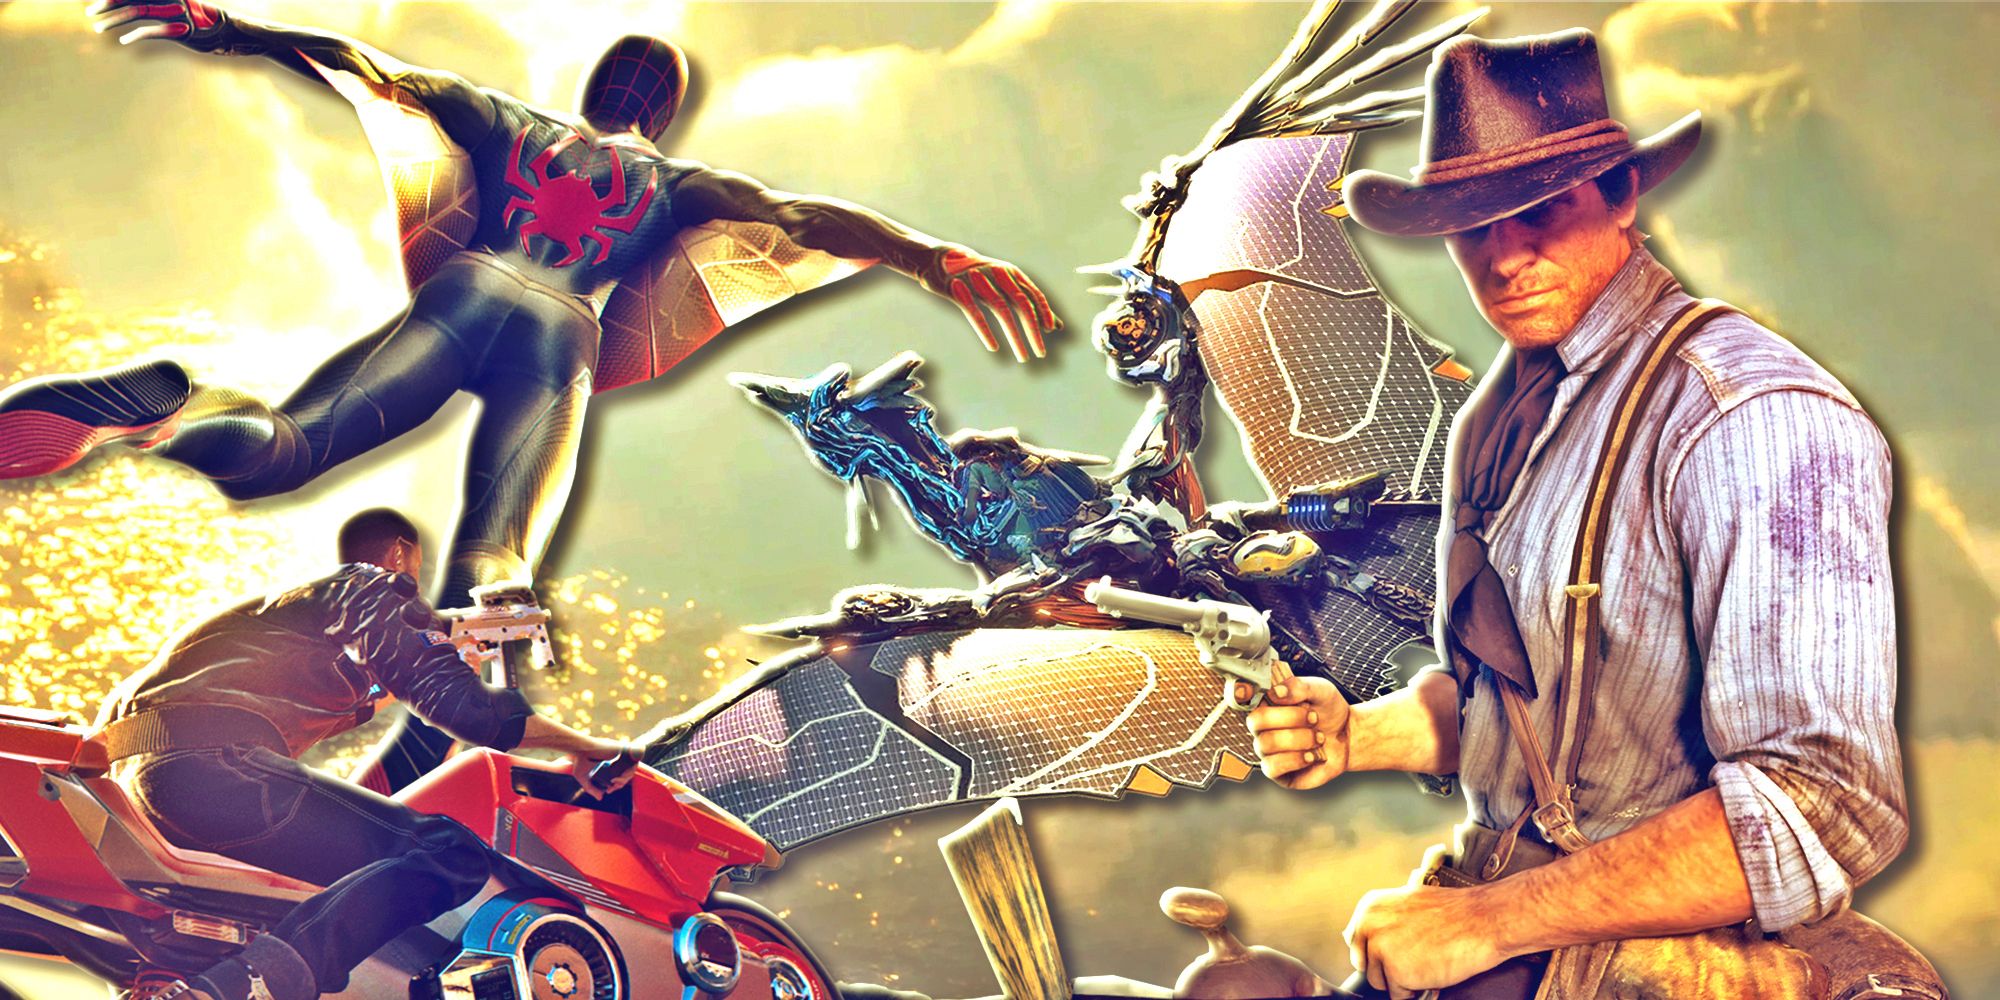 V (Cyberpunk 2077) on a Yaiba Kusanagi CT-3X, Miles Morales using his web wings, Aloy mounted a flying machine, and Arthur Morgan holding his revolver on a horse